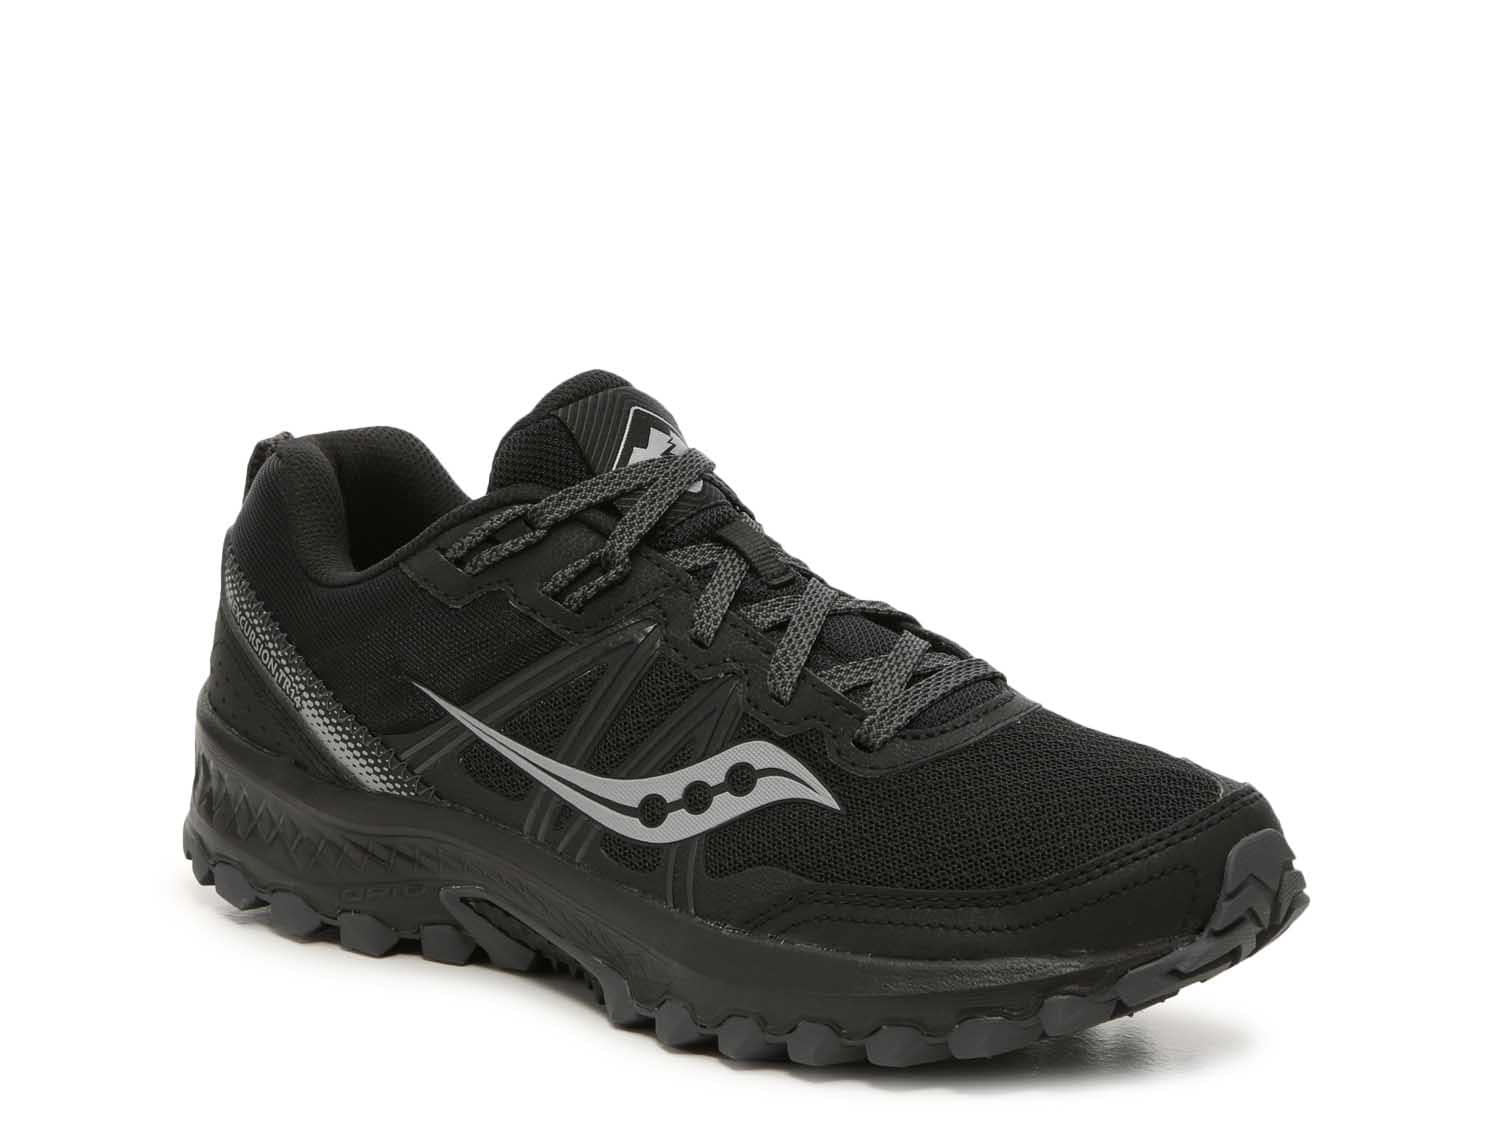 Saucony Mens Excursion Tr14 Trail Running Shoe 